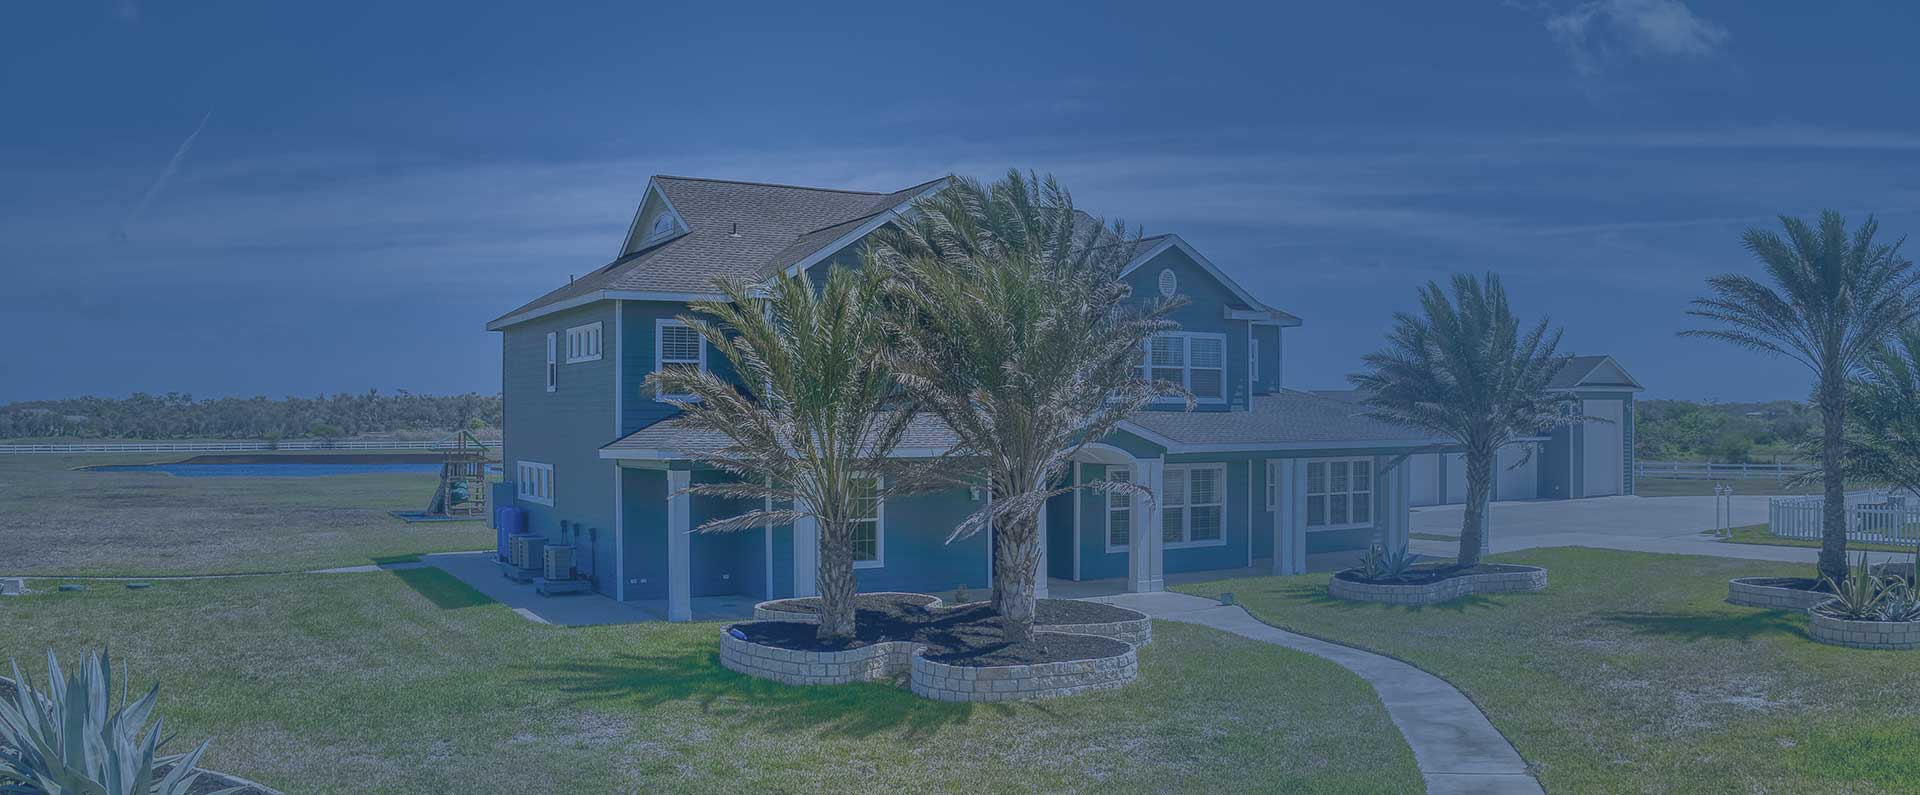 Homes for sale in Rockport Texas | Spears & Co. Real Estate